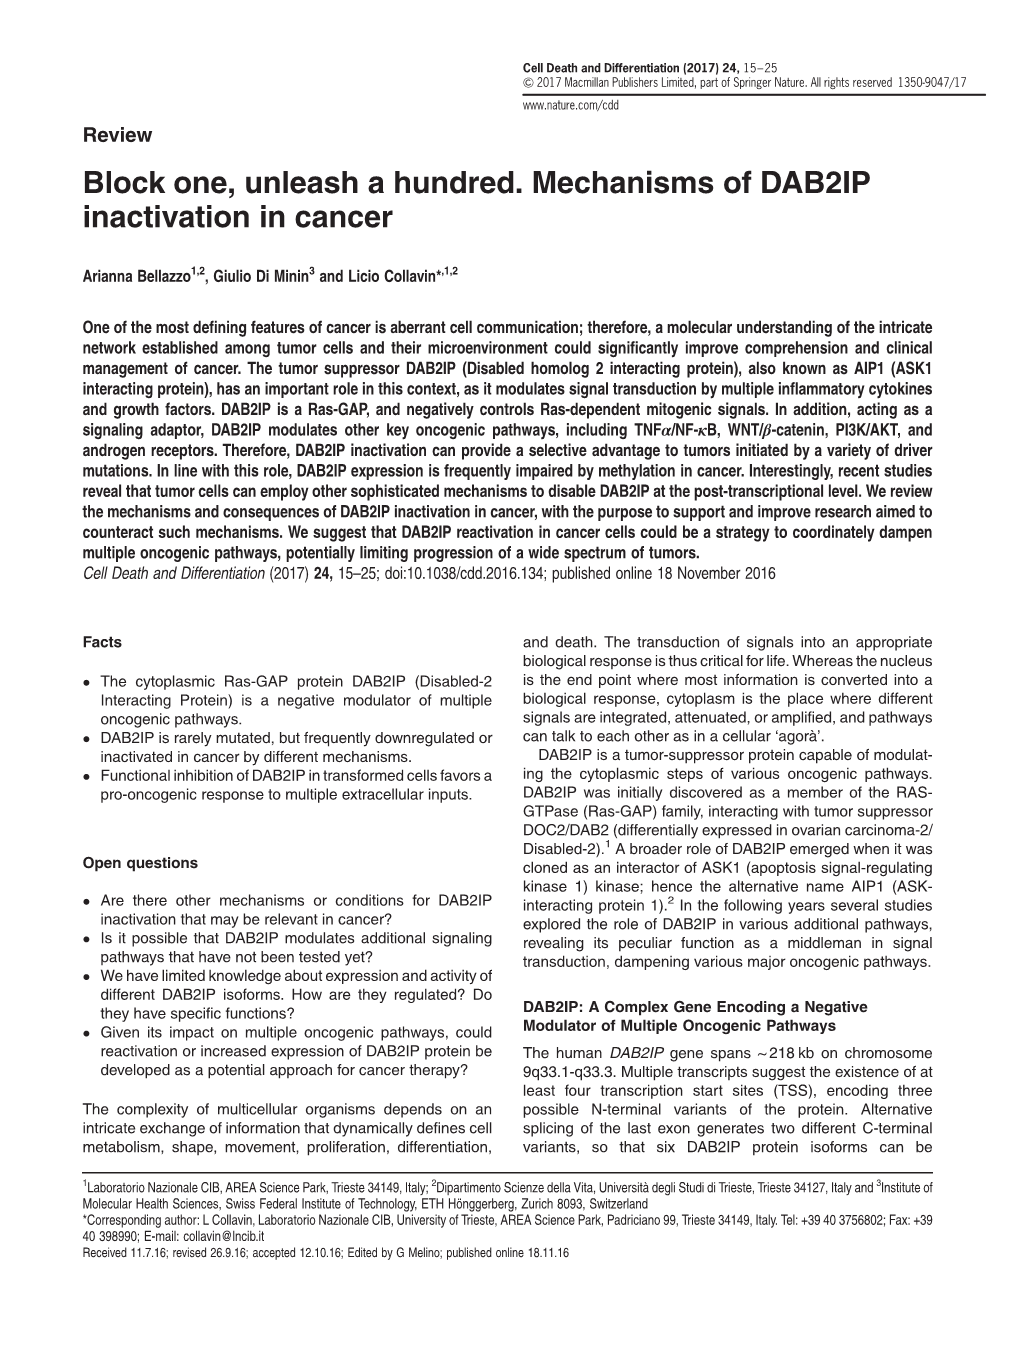 Block One, Unleash a Hundred. Mechanisms of DAB2IP Inactivation in Cancer